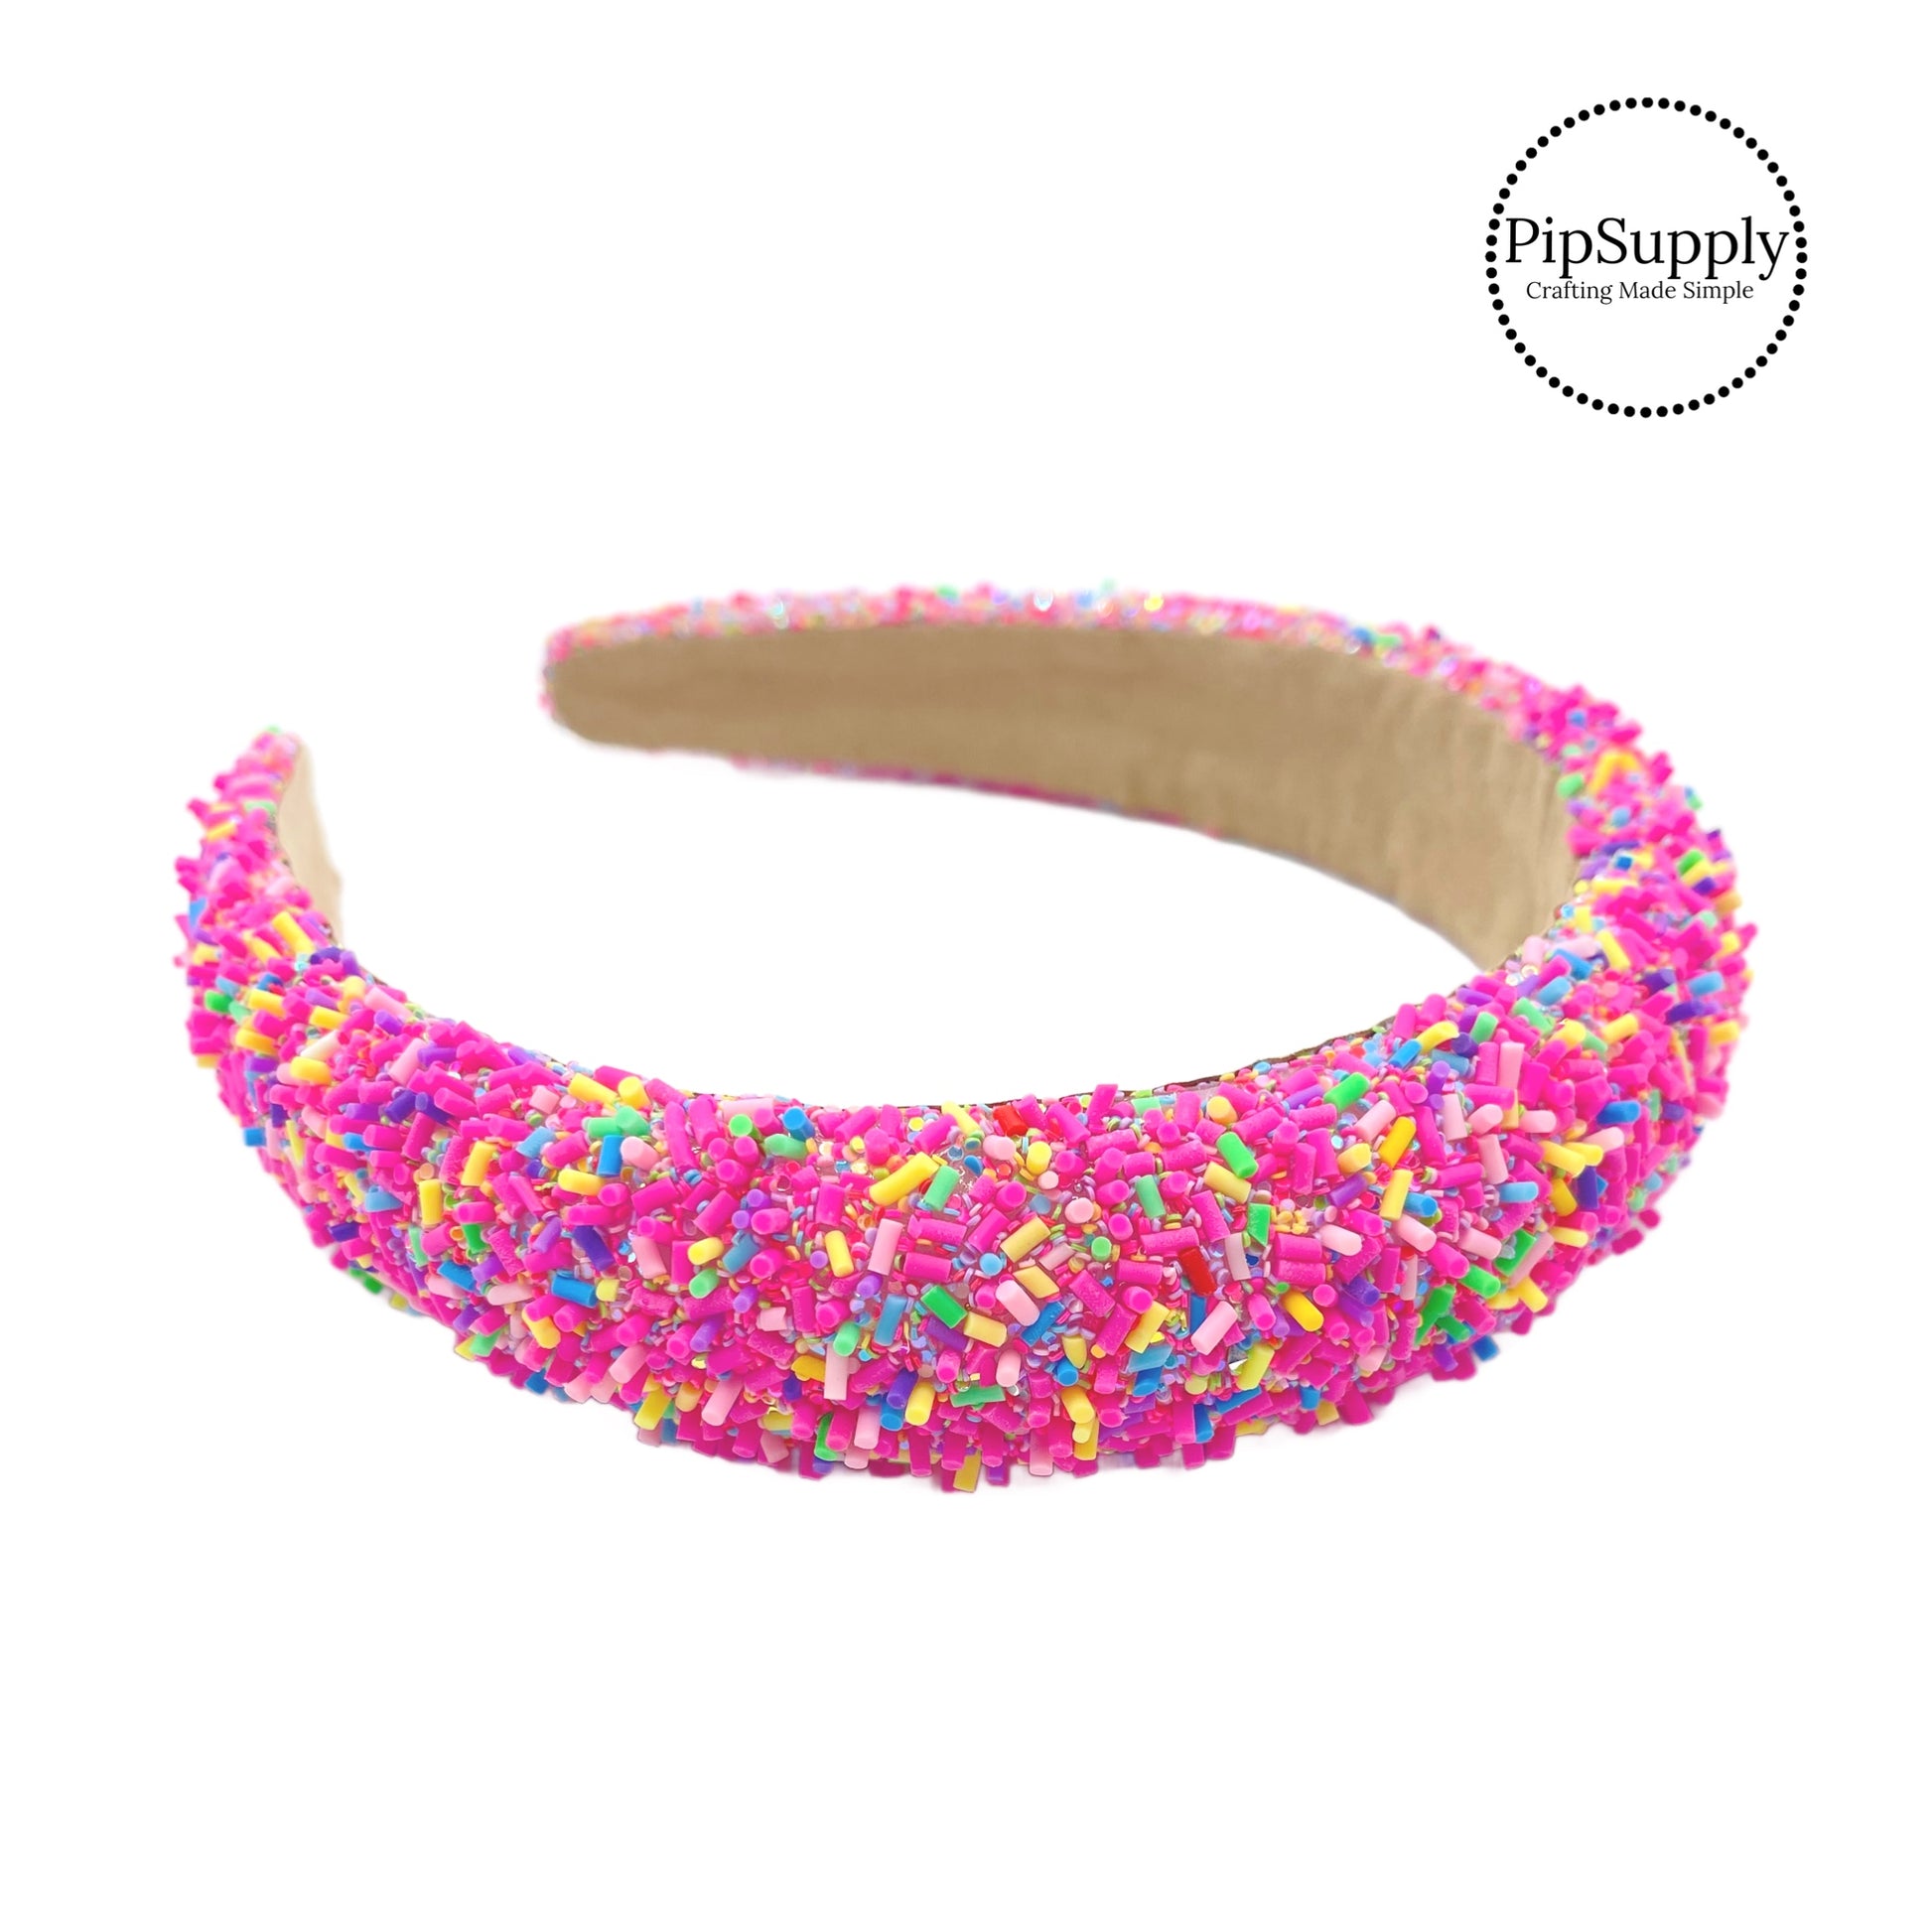 These pink glitter headbands are a stylish hair accessory and have the on and off ease of a headband. These spring party themed headbands are a perfect simple and fashionable answer to keeping your hair back! The headbands feature glitter and bright sprinkle mix.